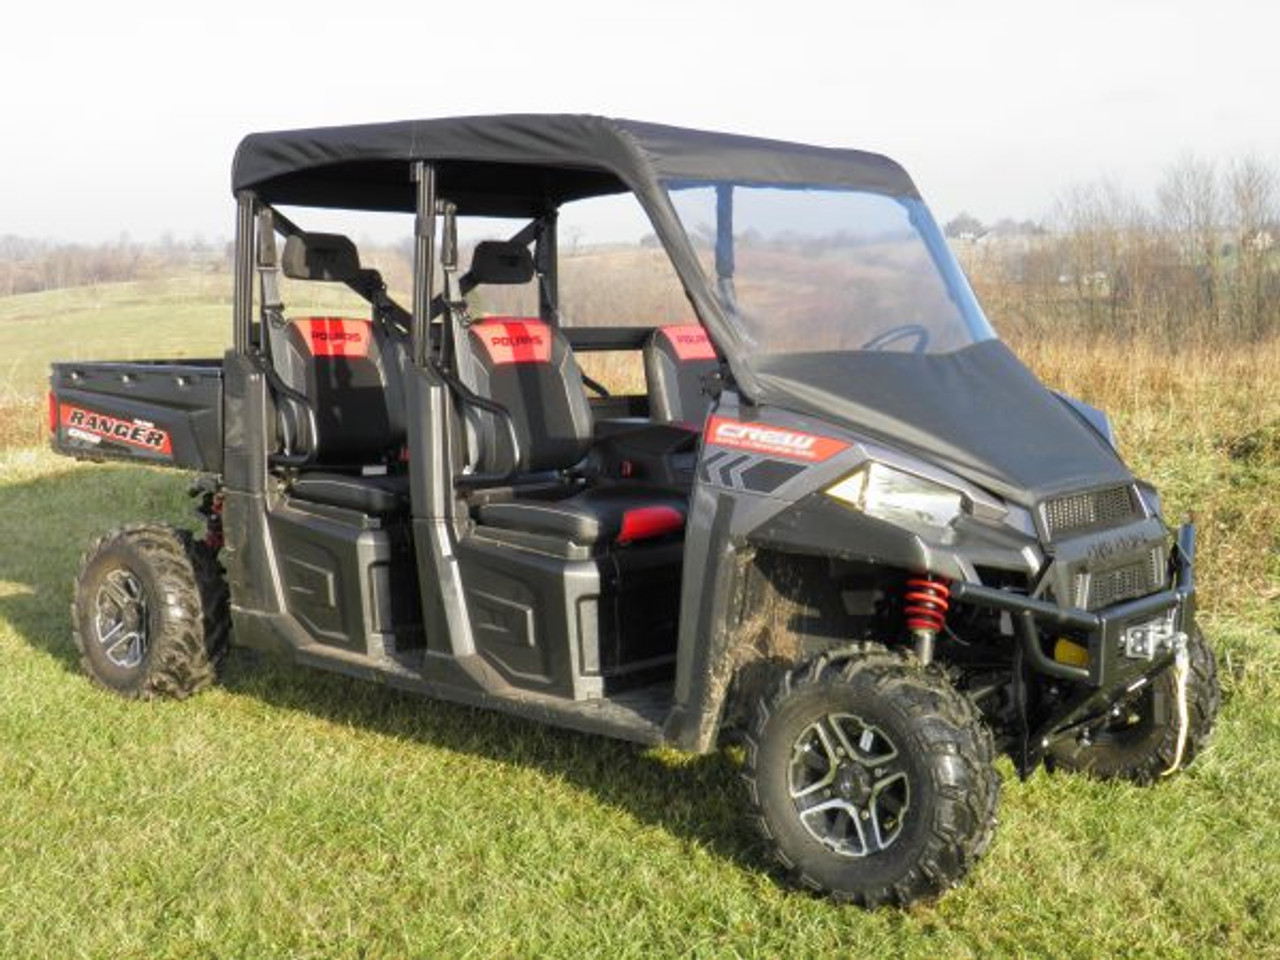 3 Star side x side Polaris Ranger Crew 900, XP900, 900-5, 900-6, 1000, XP1000, XP570-6 vinyl windshield and top front and side angle view